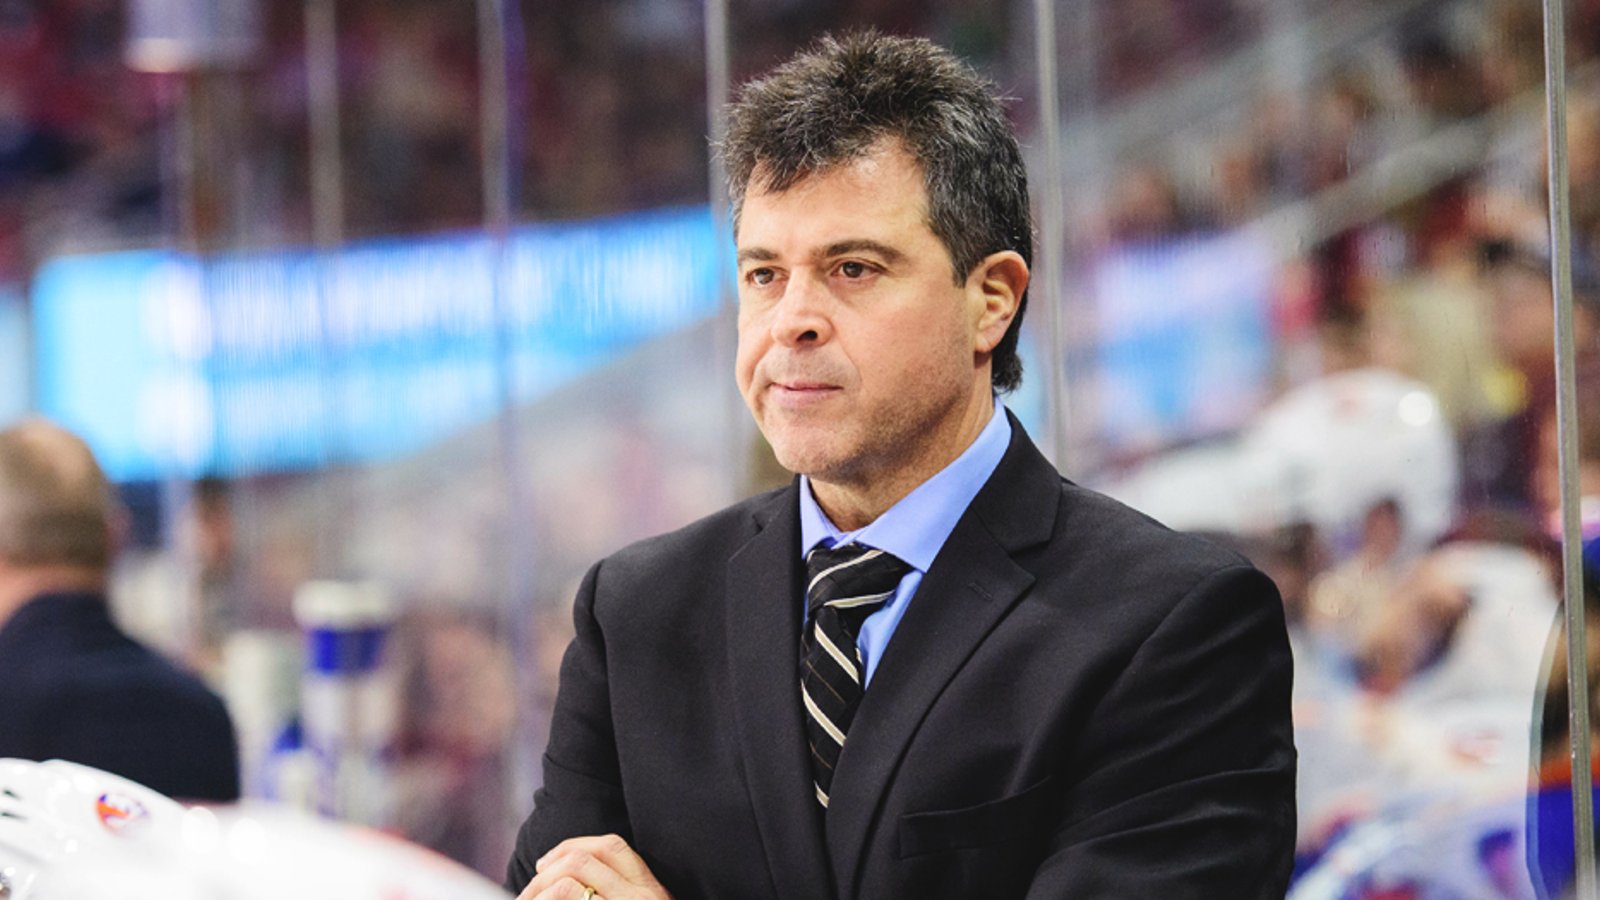 Breaking: Disgraced coach back behind an NHL bench.